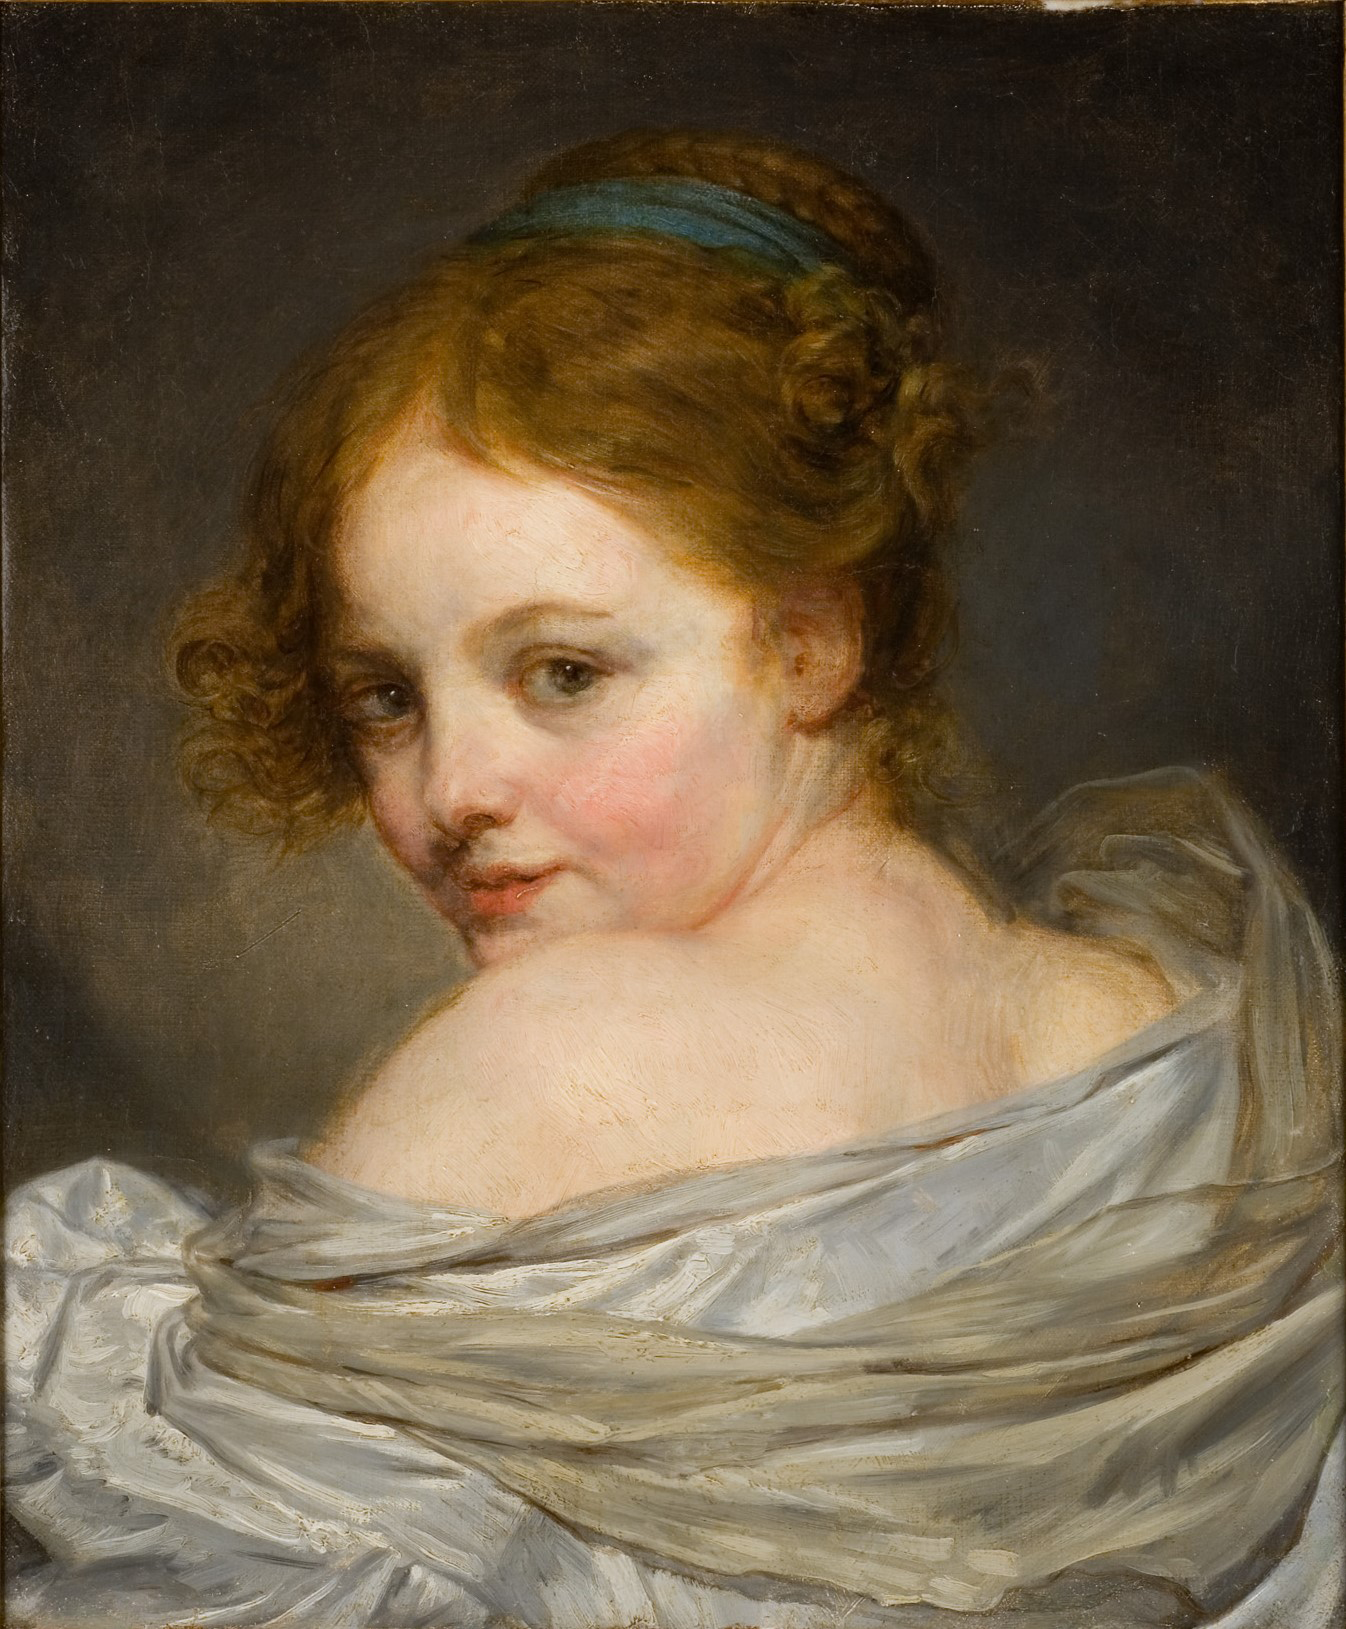 A portrait of a lightly skin toned girl with her head turned over her left shoulder. She has reddish hair with a light blue tie or ribbon running through it. Her face has rosy, pink cheeks and her lips are a light red color. Her shoulder the back of her neck and her left shoulder is uncovered revealing some skin. The rest of her upper back is covered by a very light brown and white clothing. The backdrop is various shades of gray.